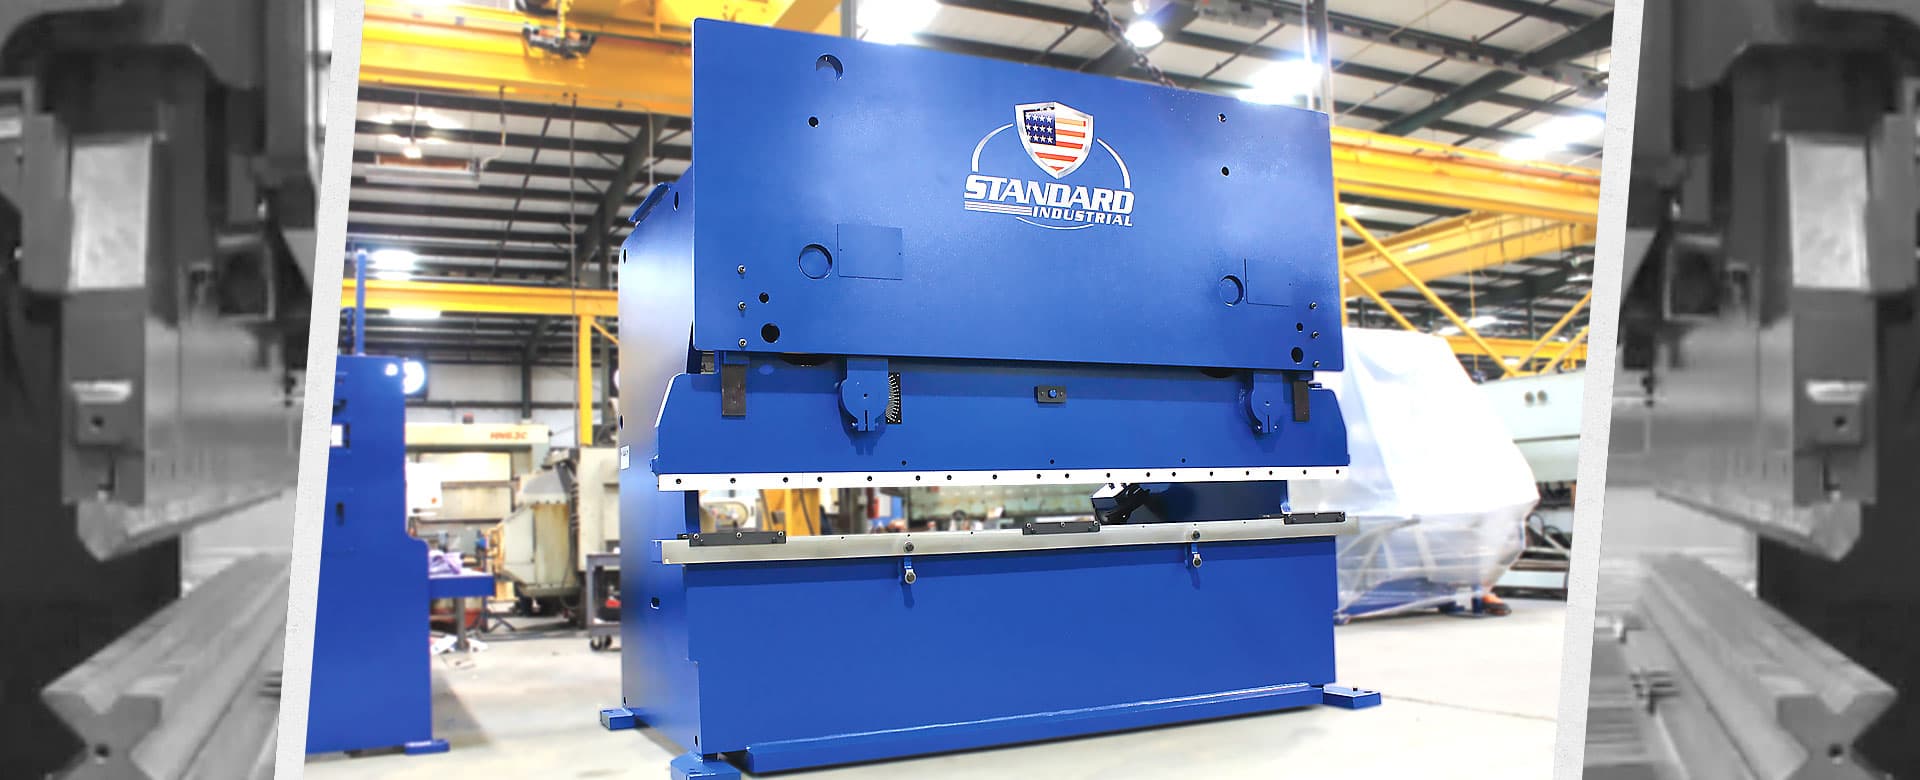 Dual Cylinder Press Brake Used For